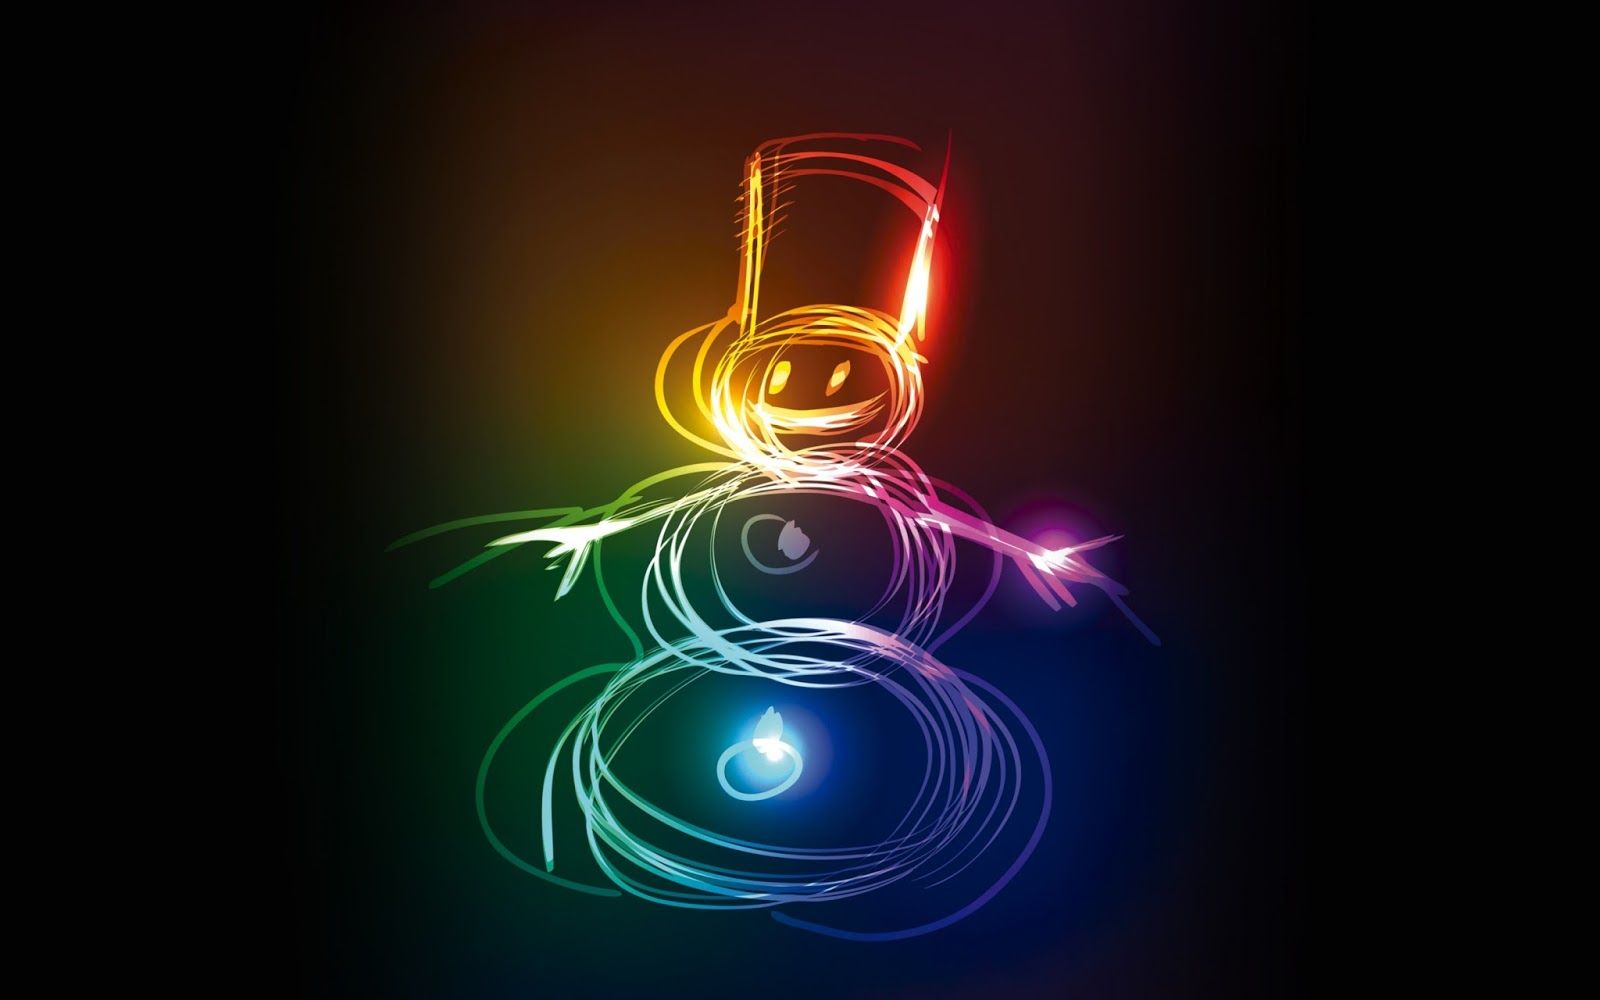 Neon Wallpaper for Android Wallpaper. Neon wallpaper, Wallpaper iphone neon, Snowman wallpaper